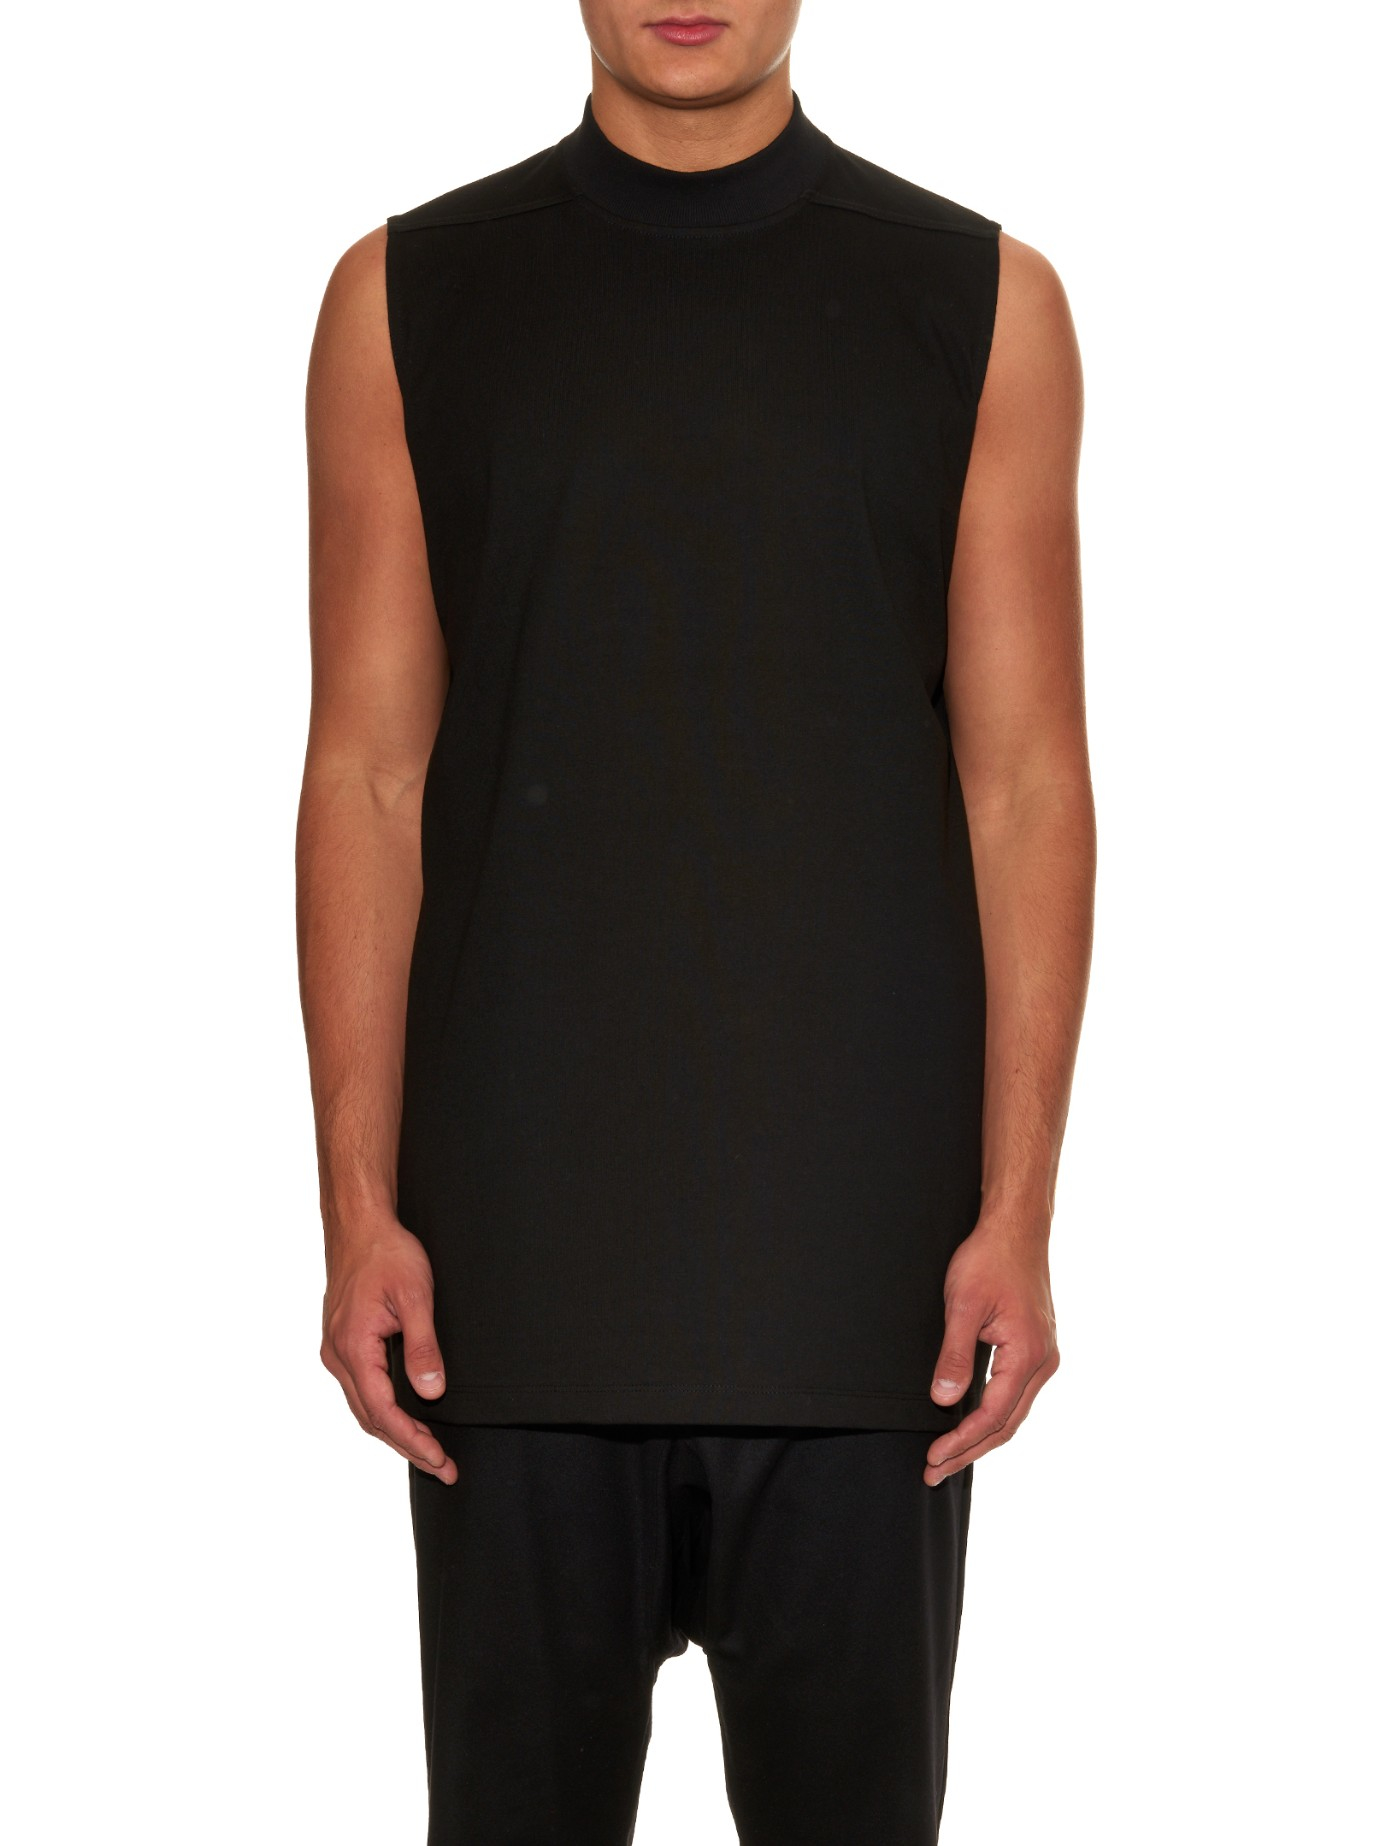 Lyst - Rick Owens High-Neck Cotton Tank Top in Black for Men